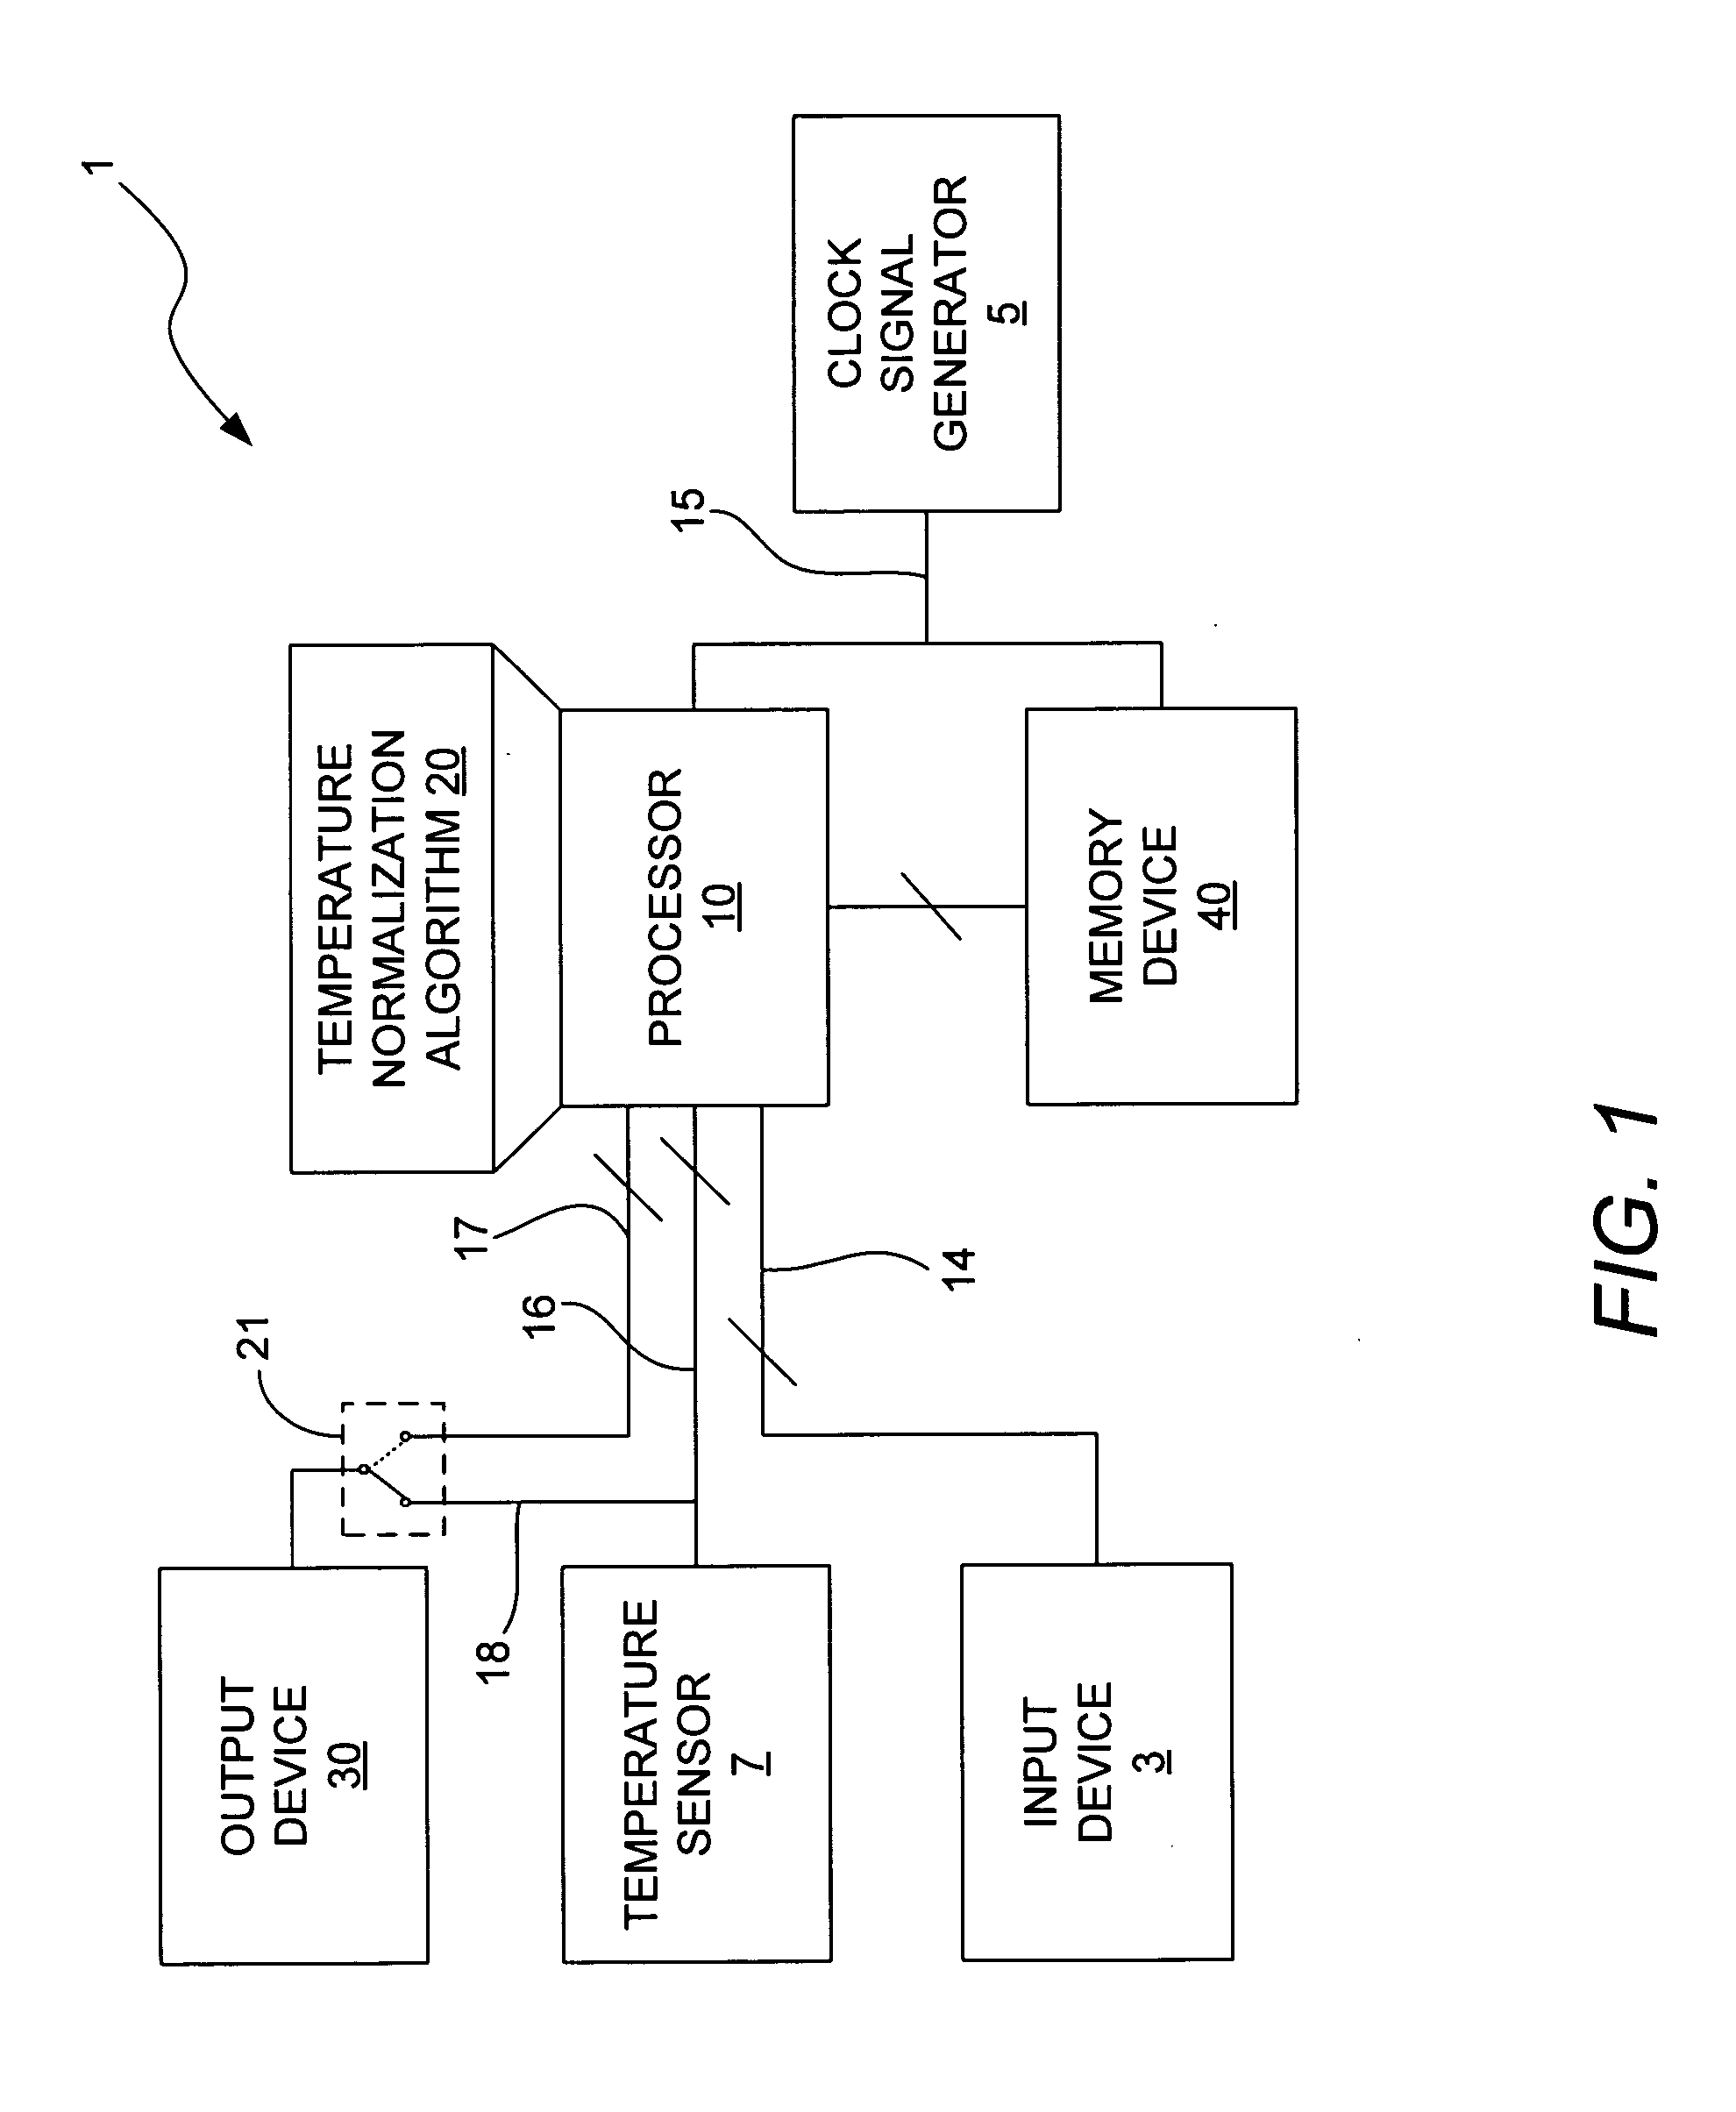 Bio-accurate temperature measurement device and method of quantitatively normalizing a body temperature measurement to determine a physiologically significant temperature event